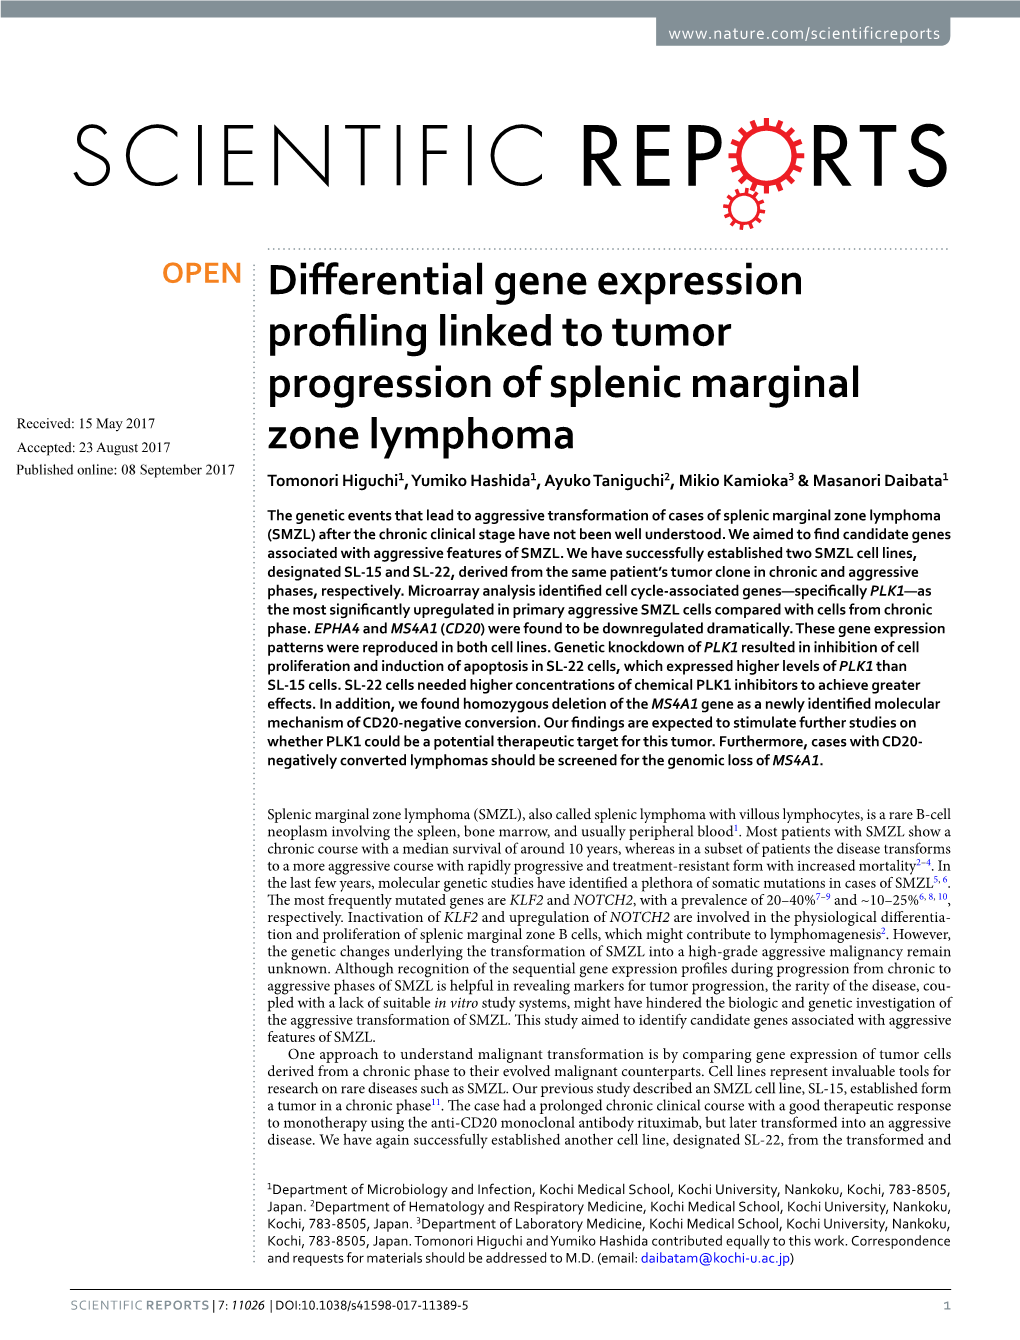 Differential Gene Expression Profiling Linked to Tumor Progression Of